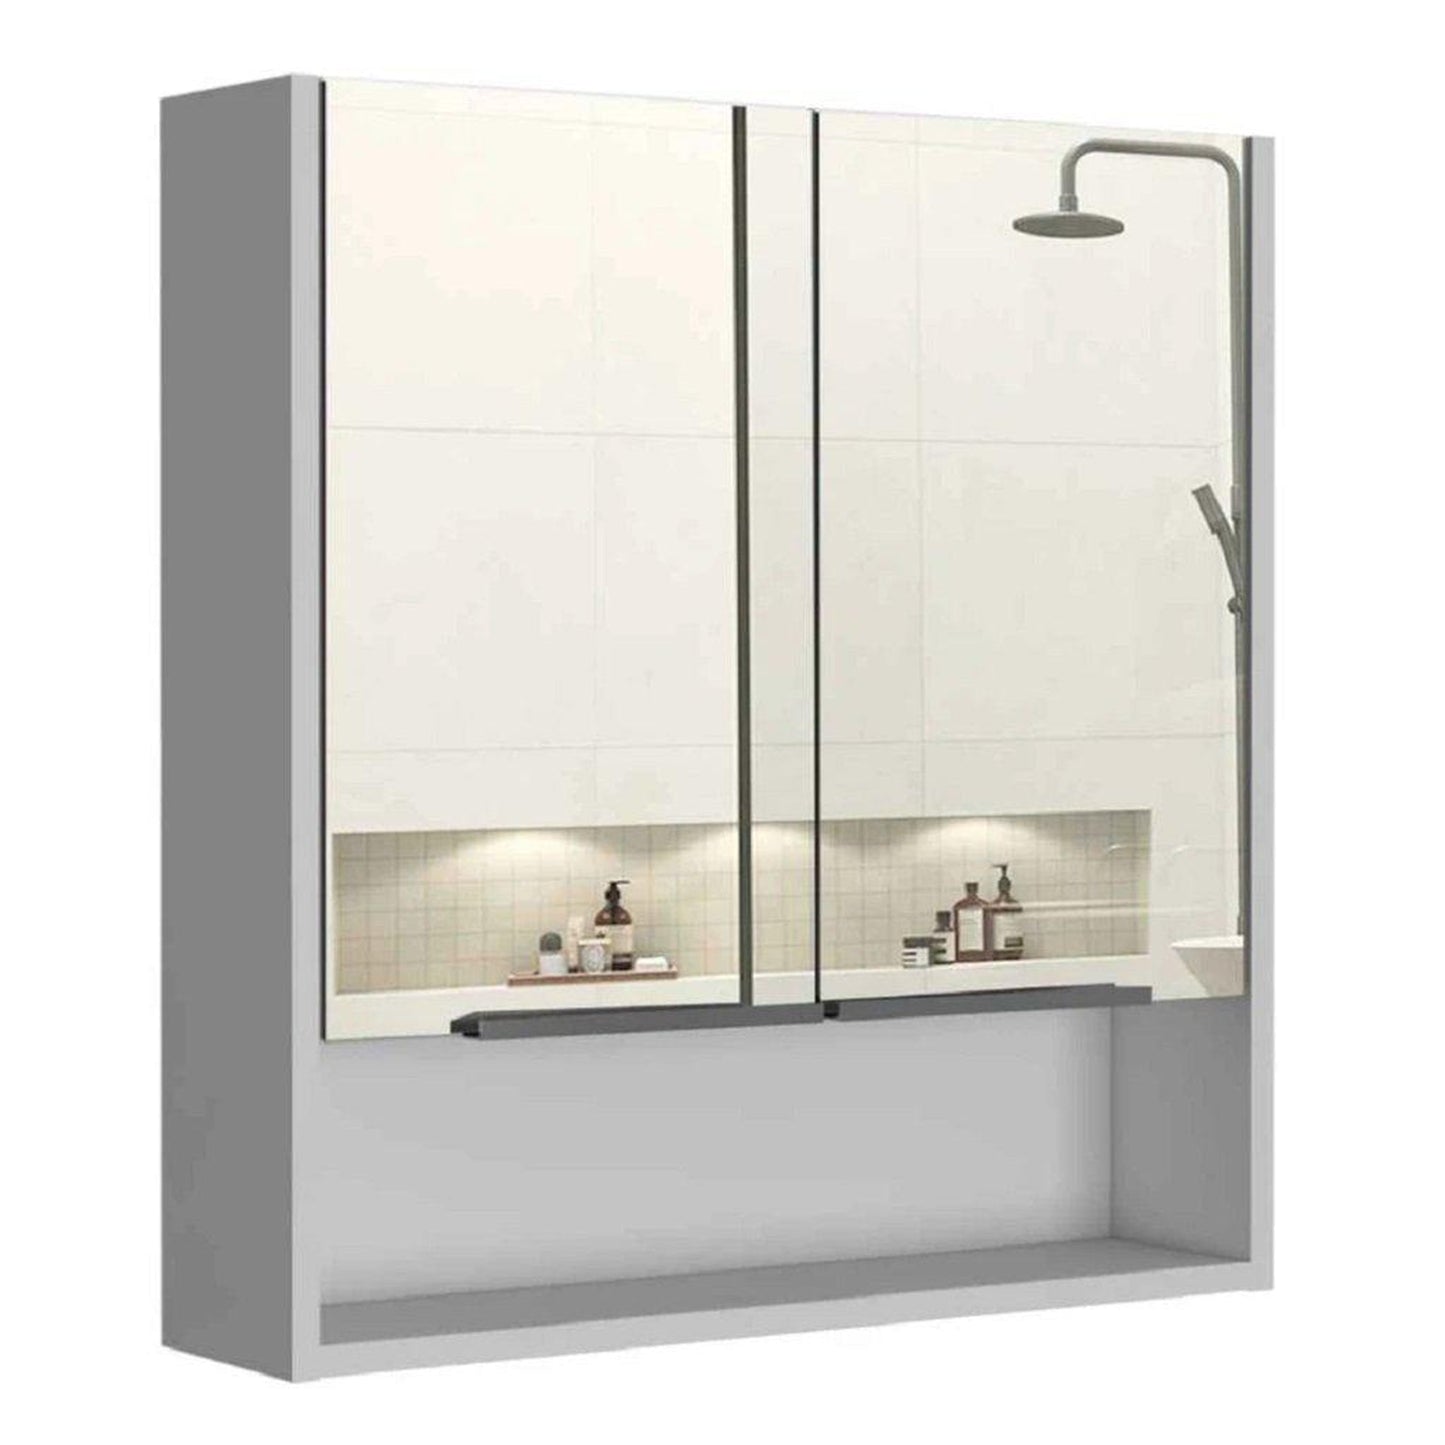 TUHOME Jaspe 24" x 25" White Wall-Mounted Mirror Medicine Cabinet With Wide-Open Shelf